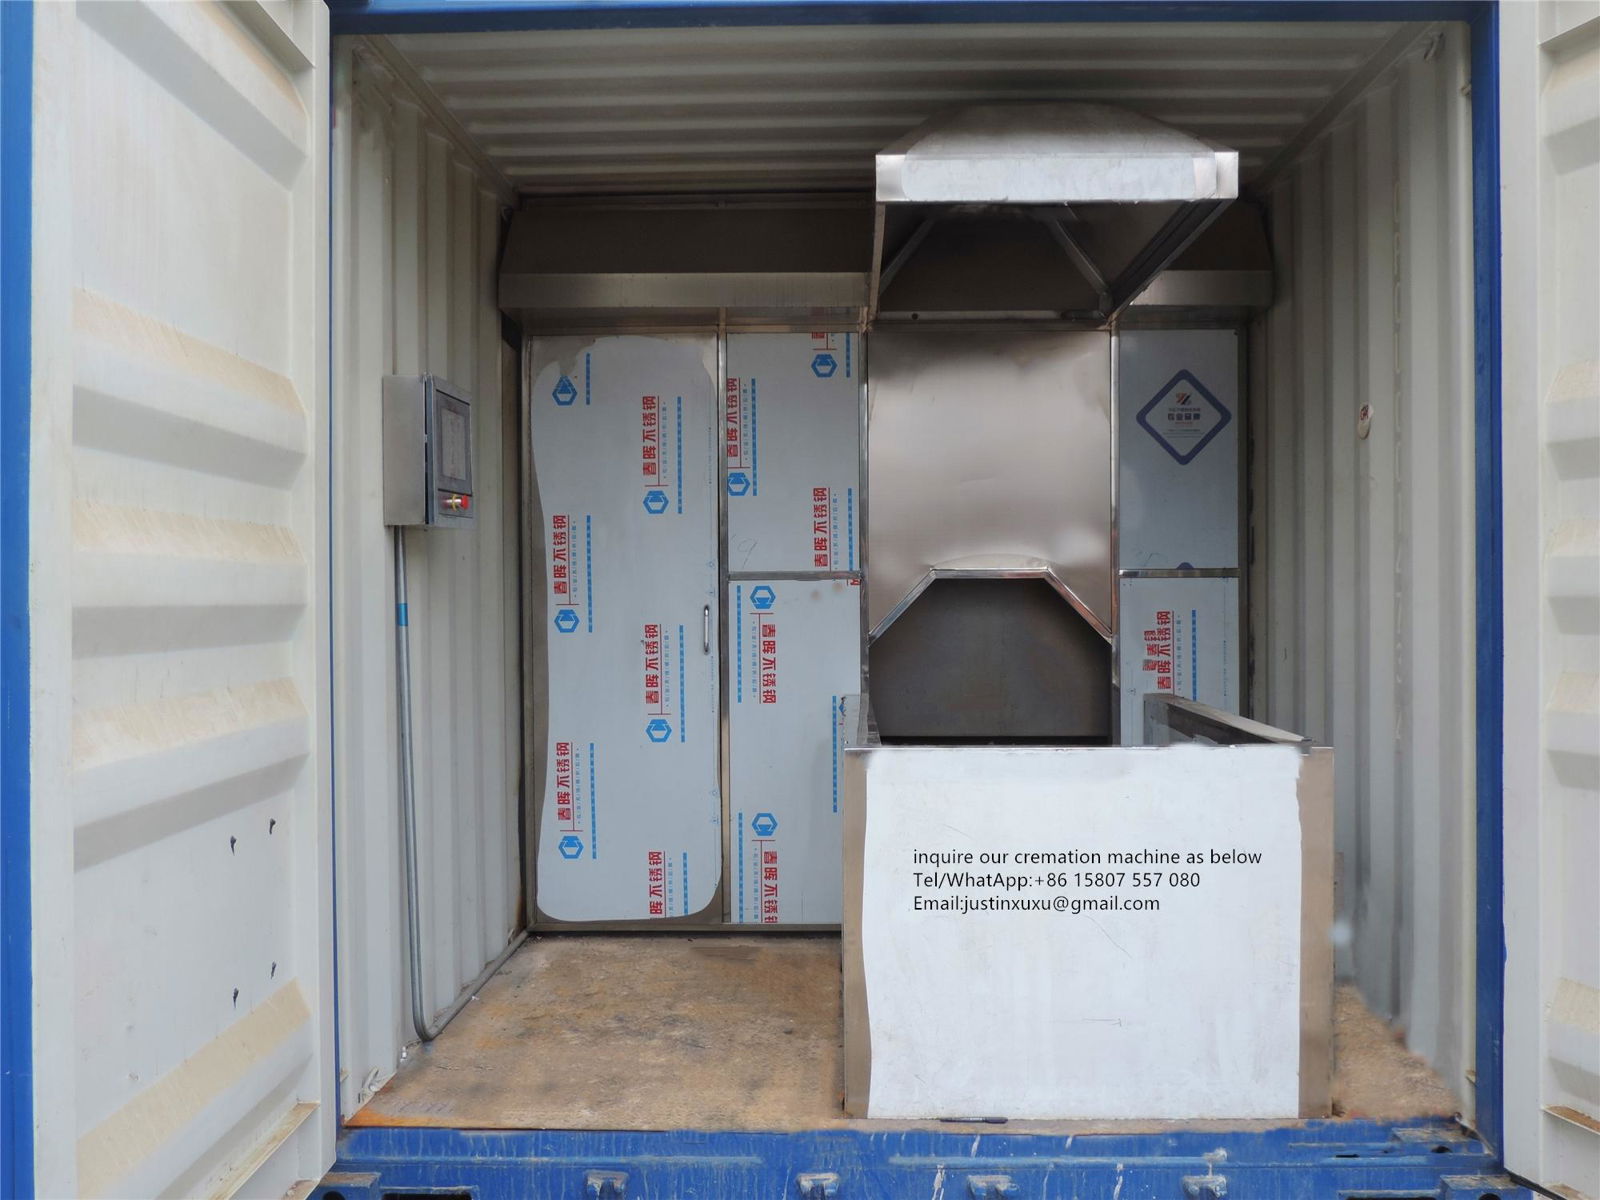 moving container furnaces for cremation designed human  for Malaysia market   2